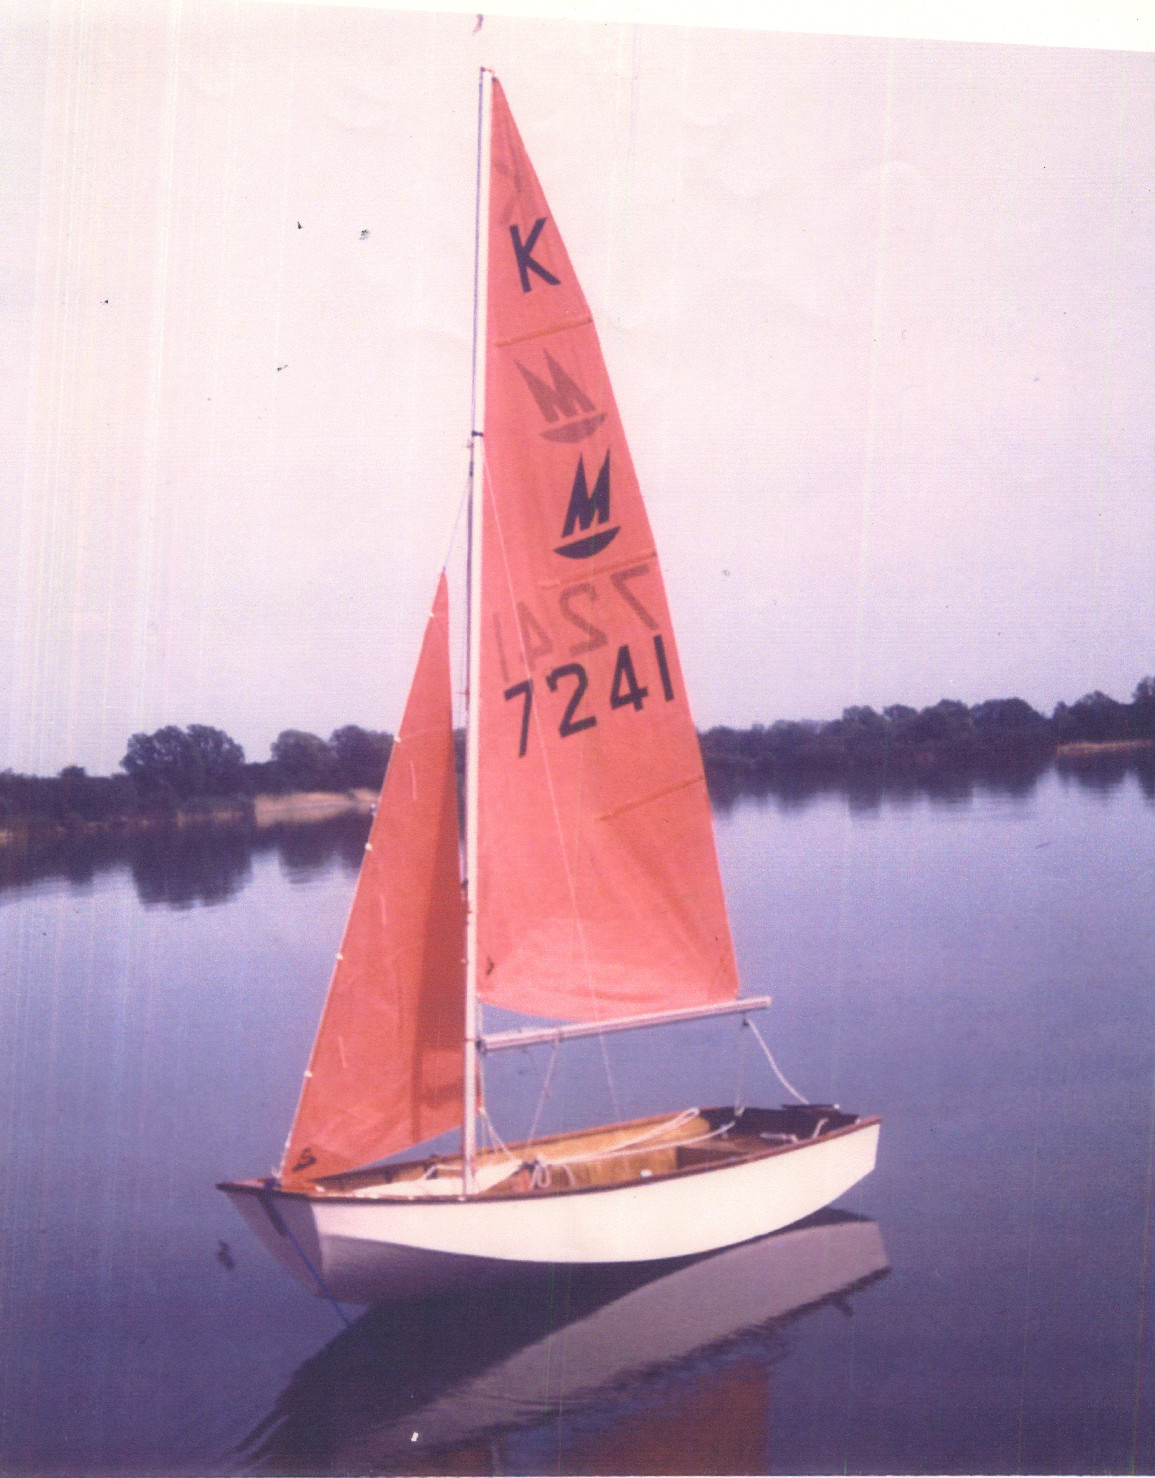 A white wooden Mirror dinghy with Bermuda rig with both sails hoisted, but no crew aboard on a long painter on a lake on a calm day